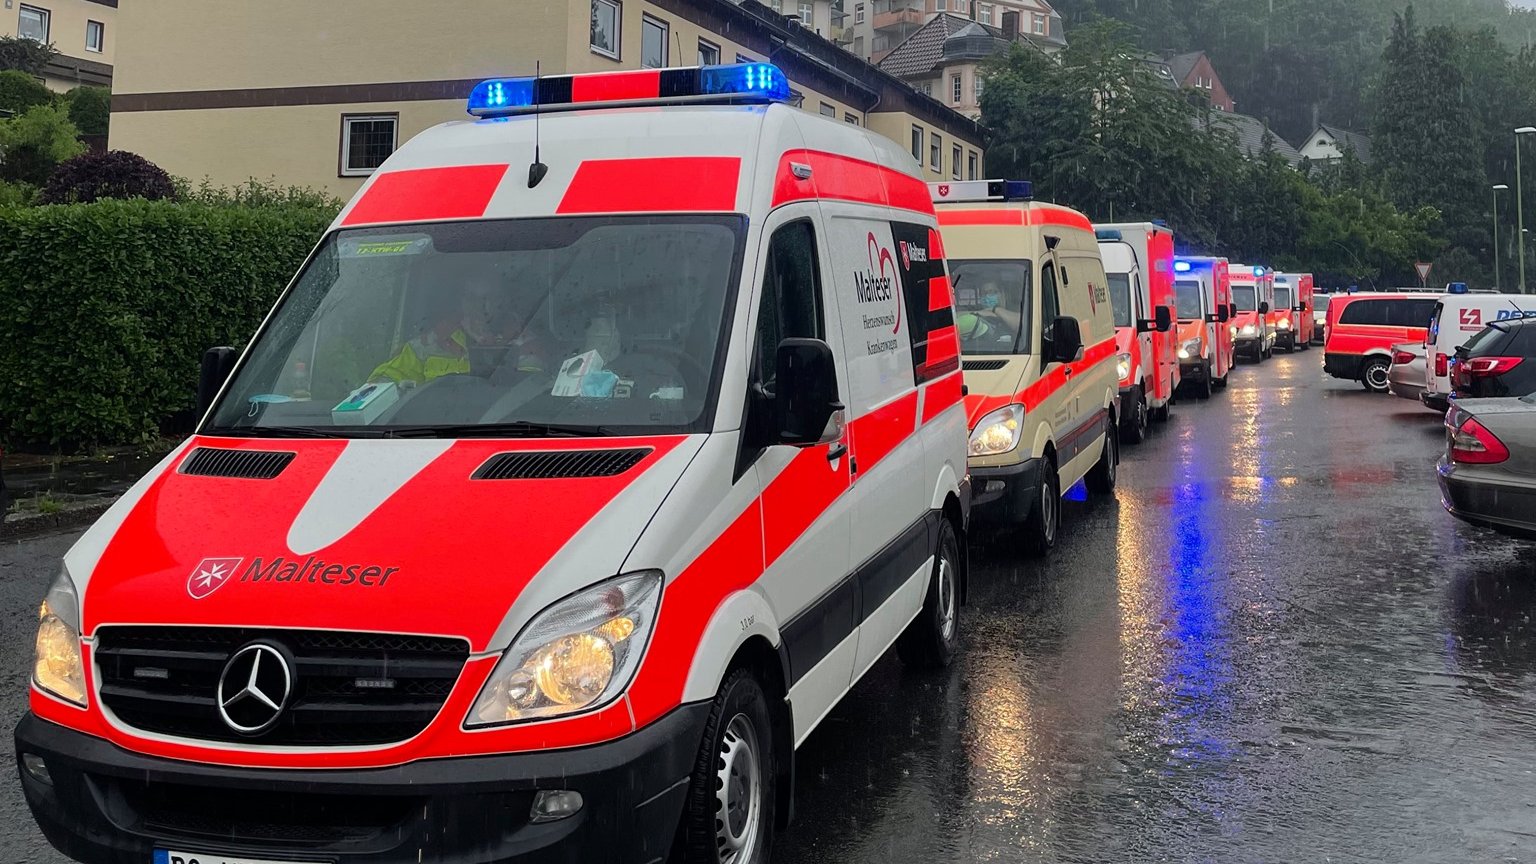 Order of Malta participates in large-scale rescue efforts after German floods